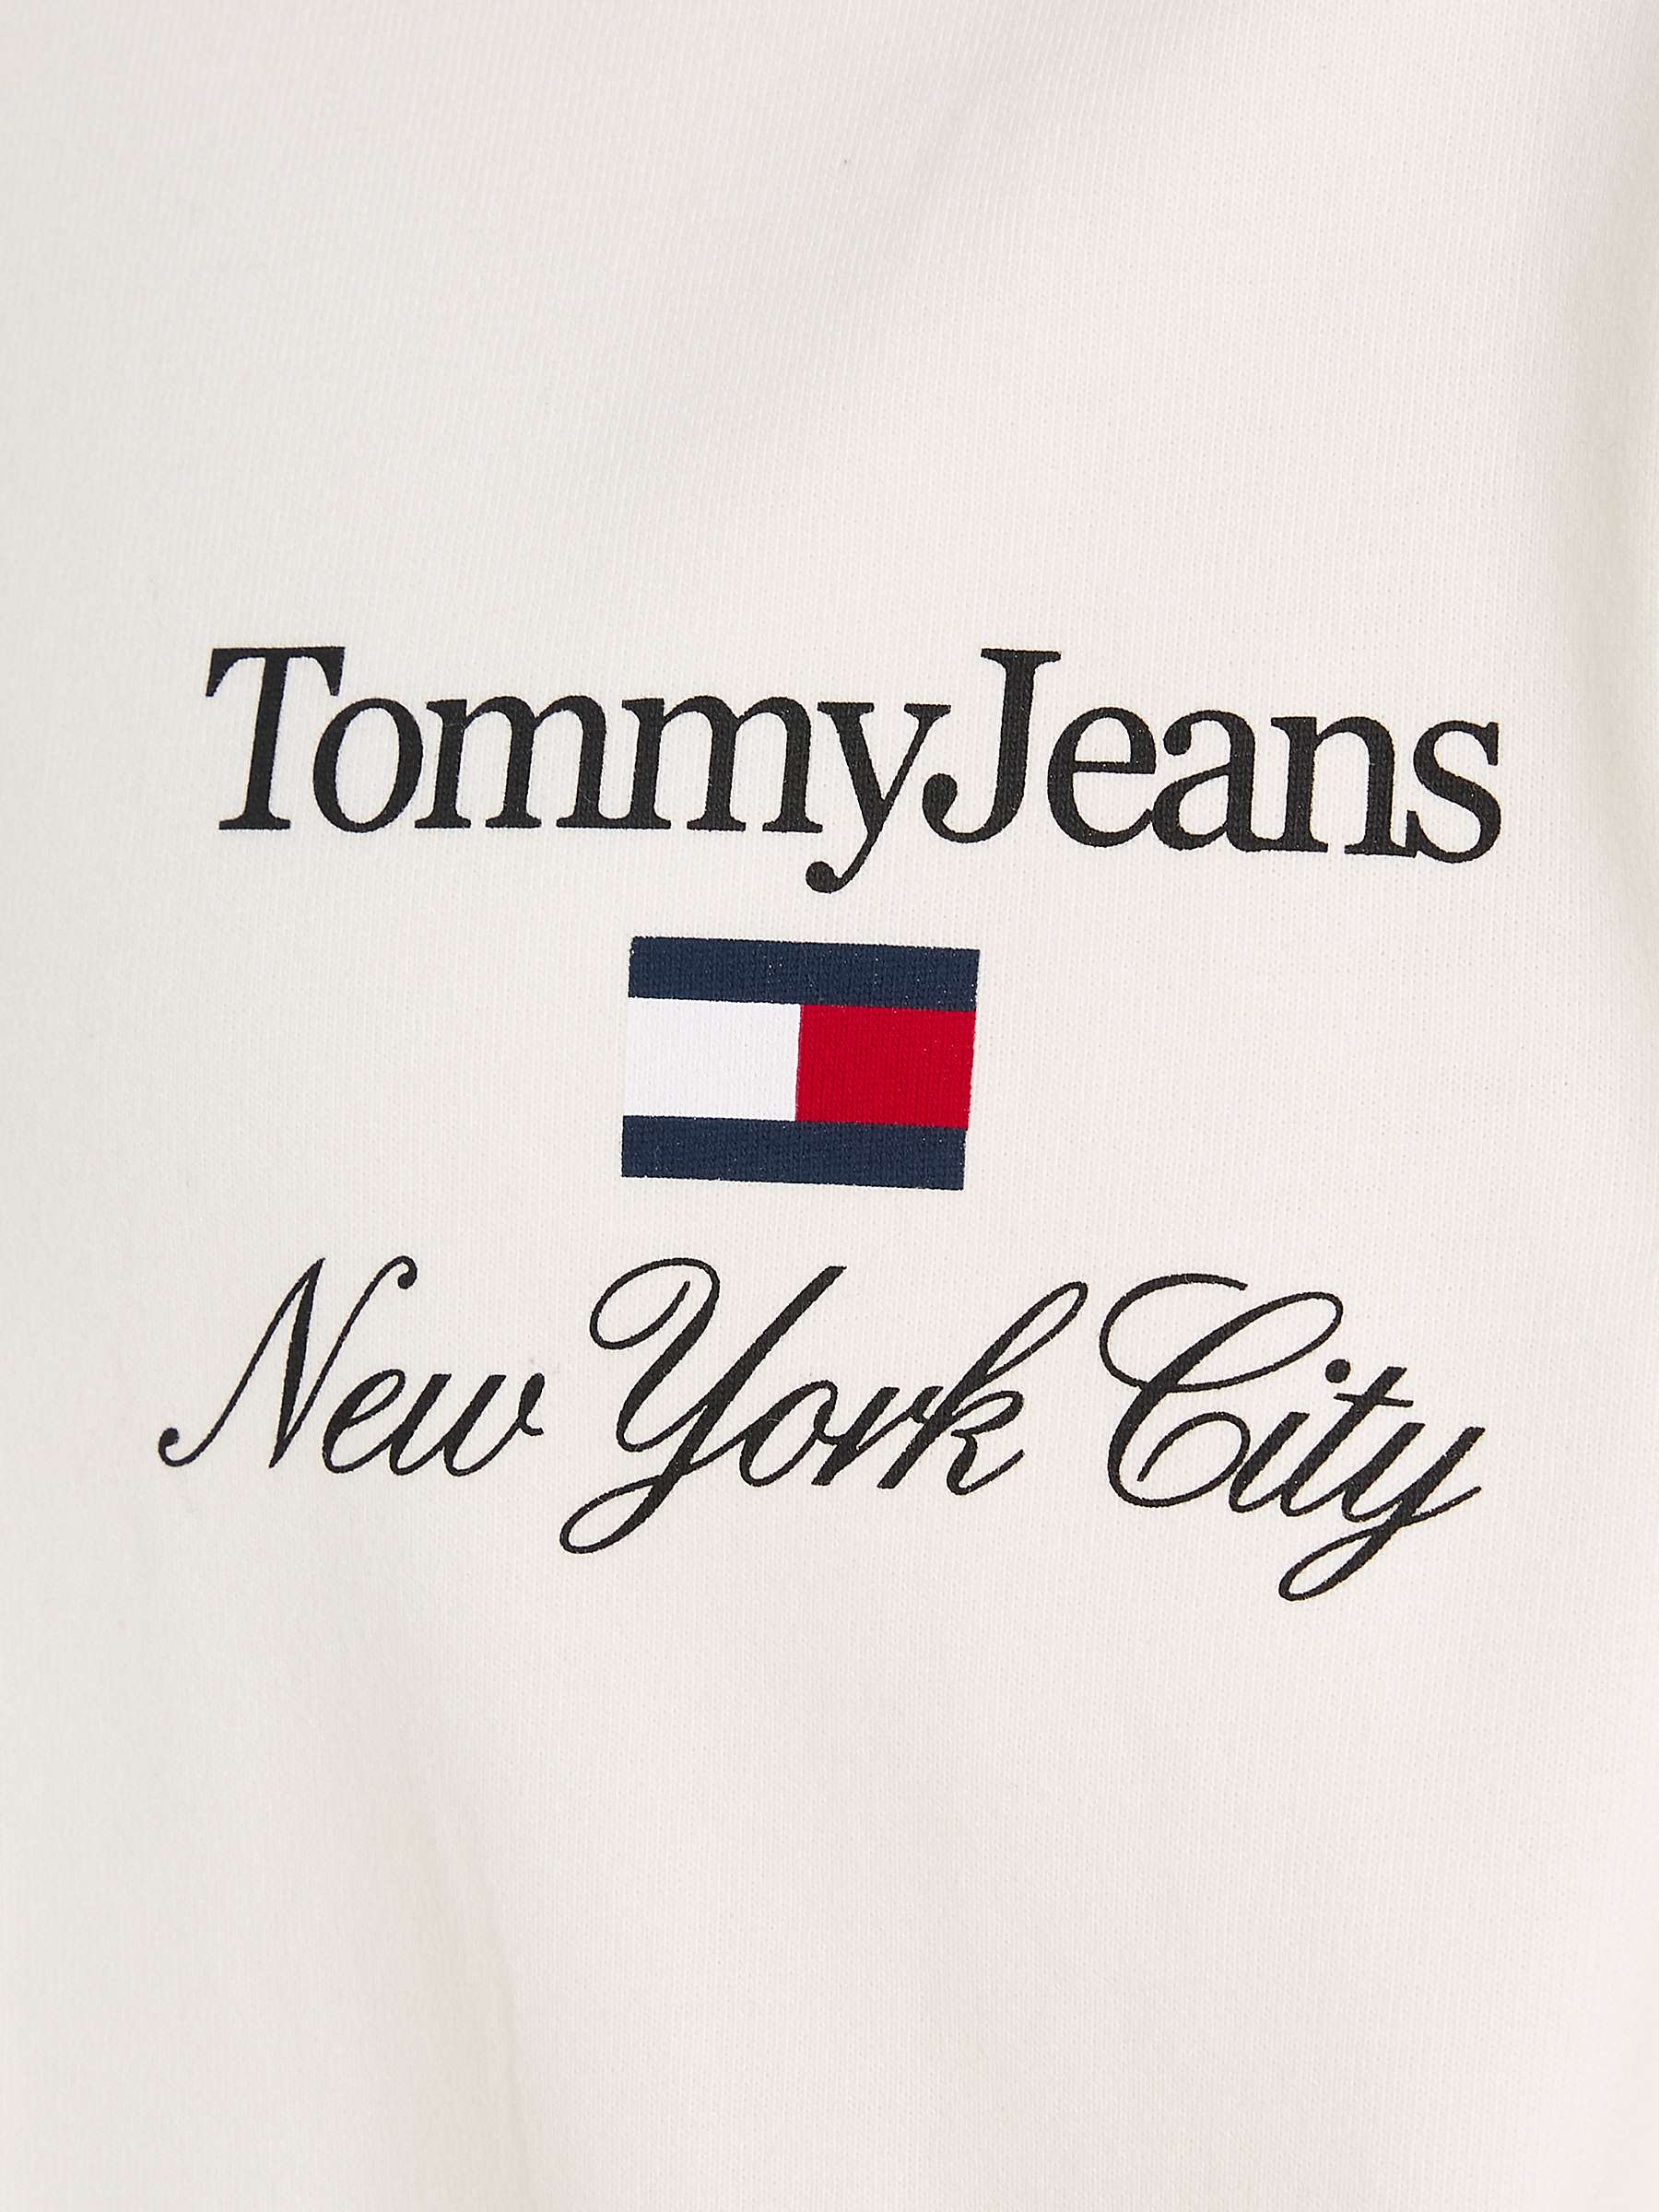 Tommy Jeans Athletic Relaxed T-Shirt, White at John Lewis & Partners